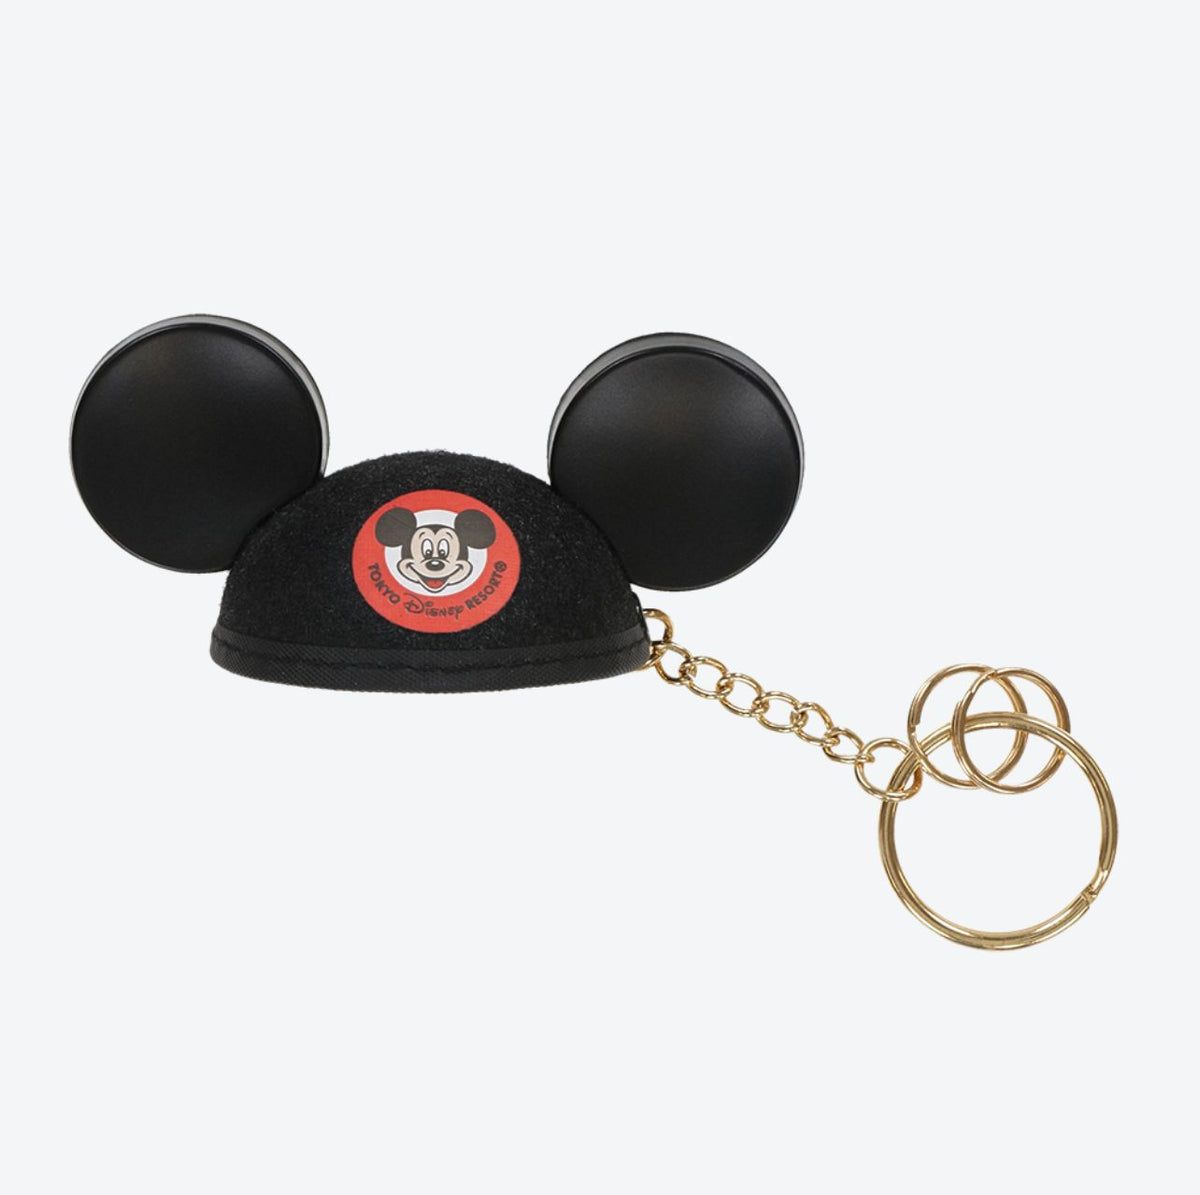 Mickey Mouse in hat with cane Disneyland keychain from our